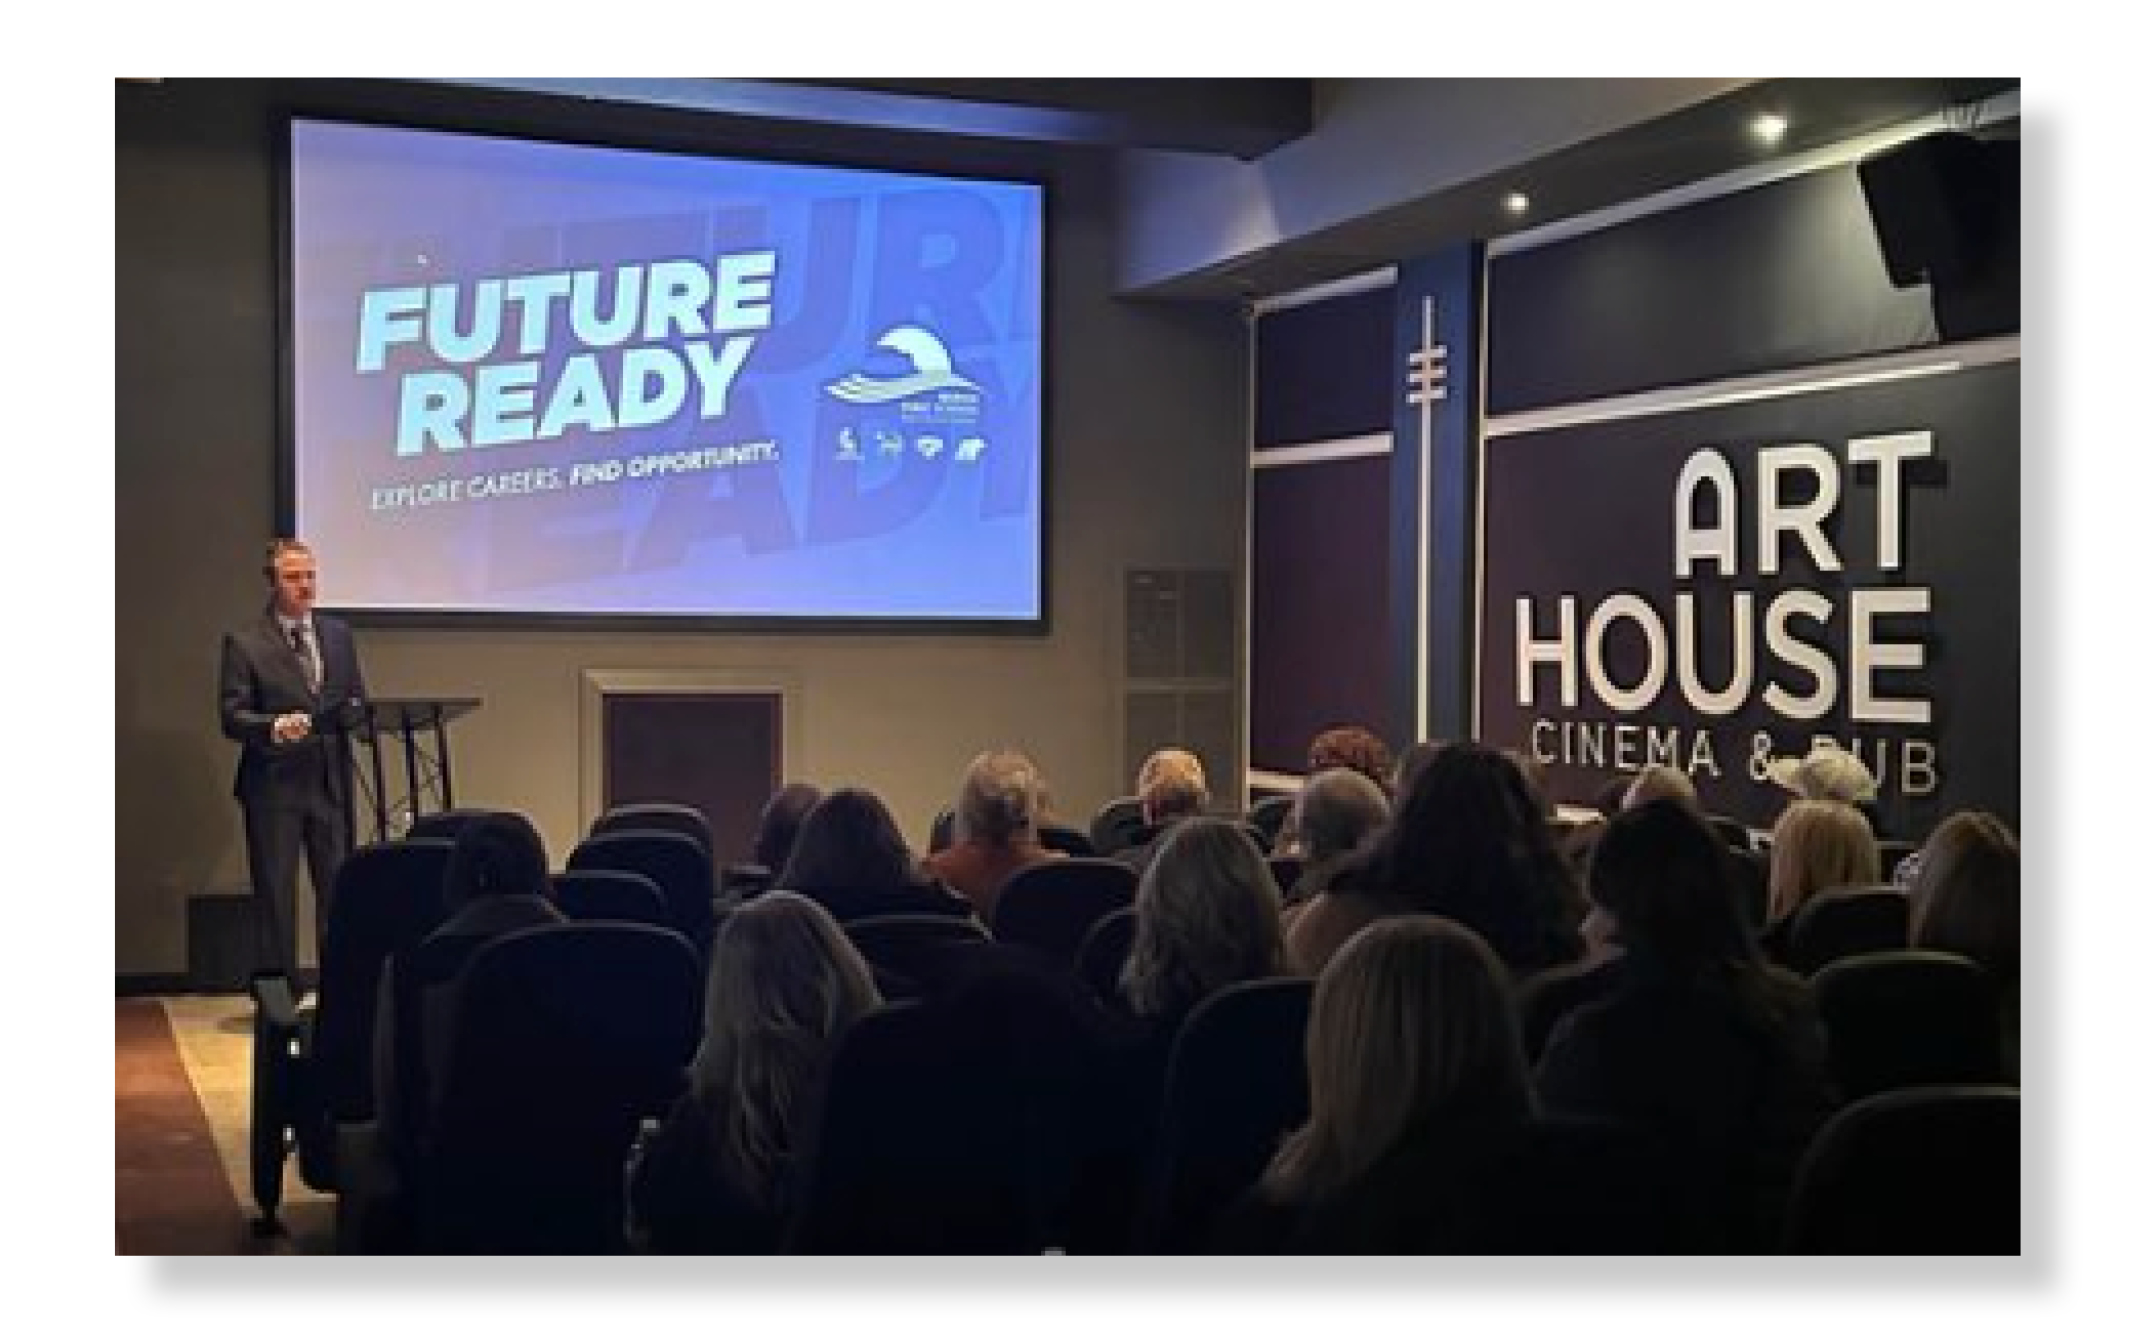 The Future Ready Community Campaign Launch Event was a huge success!